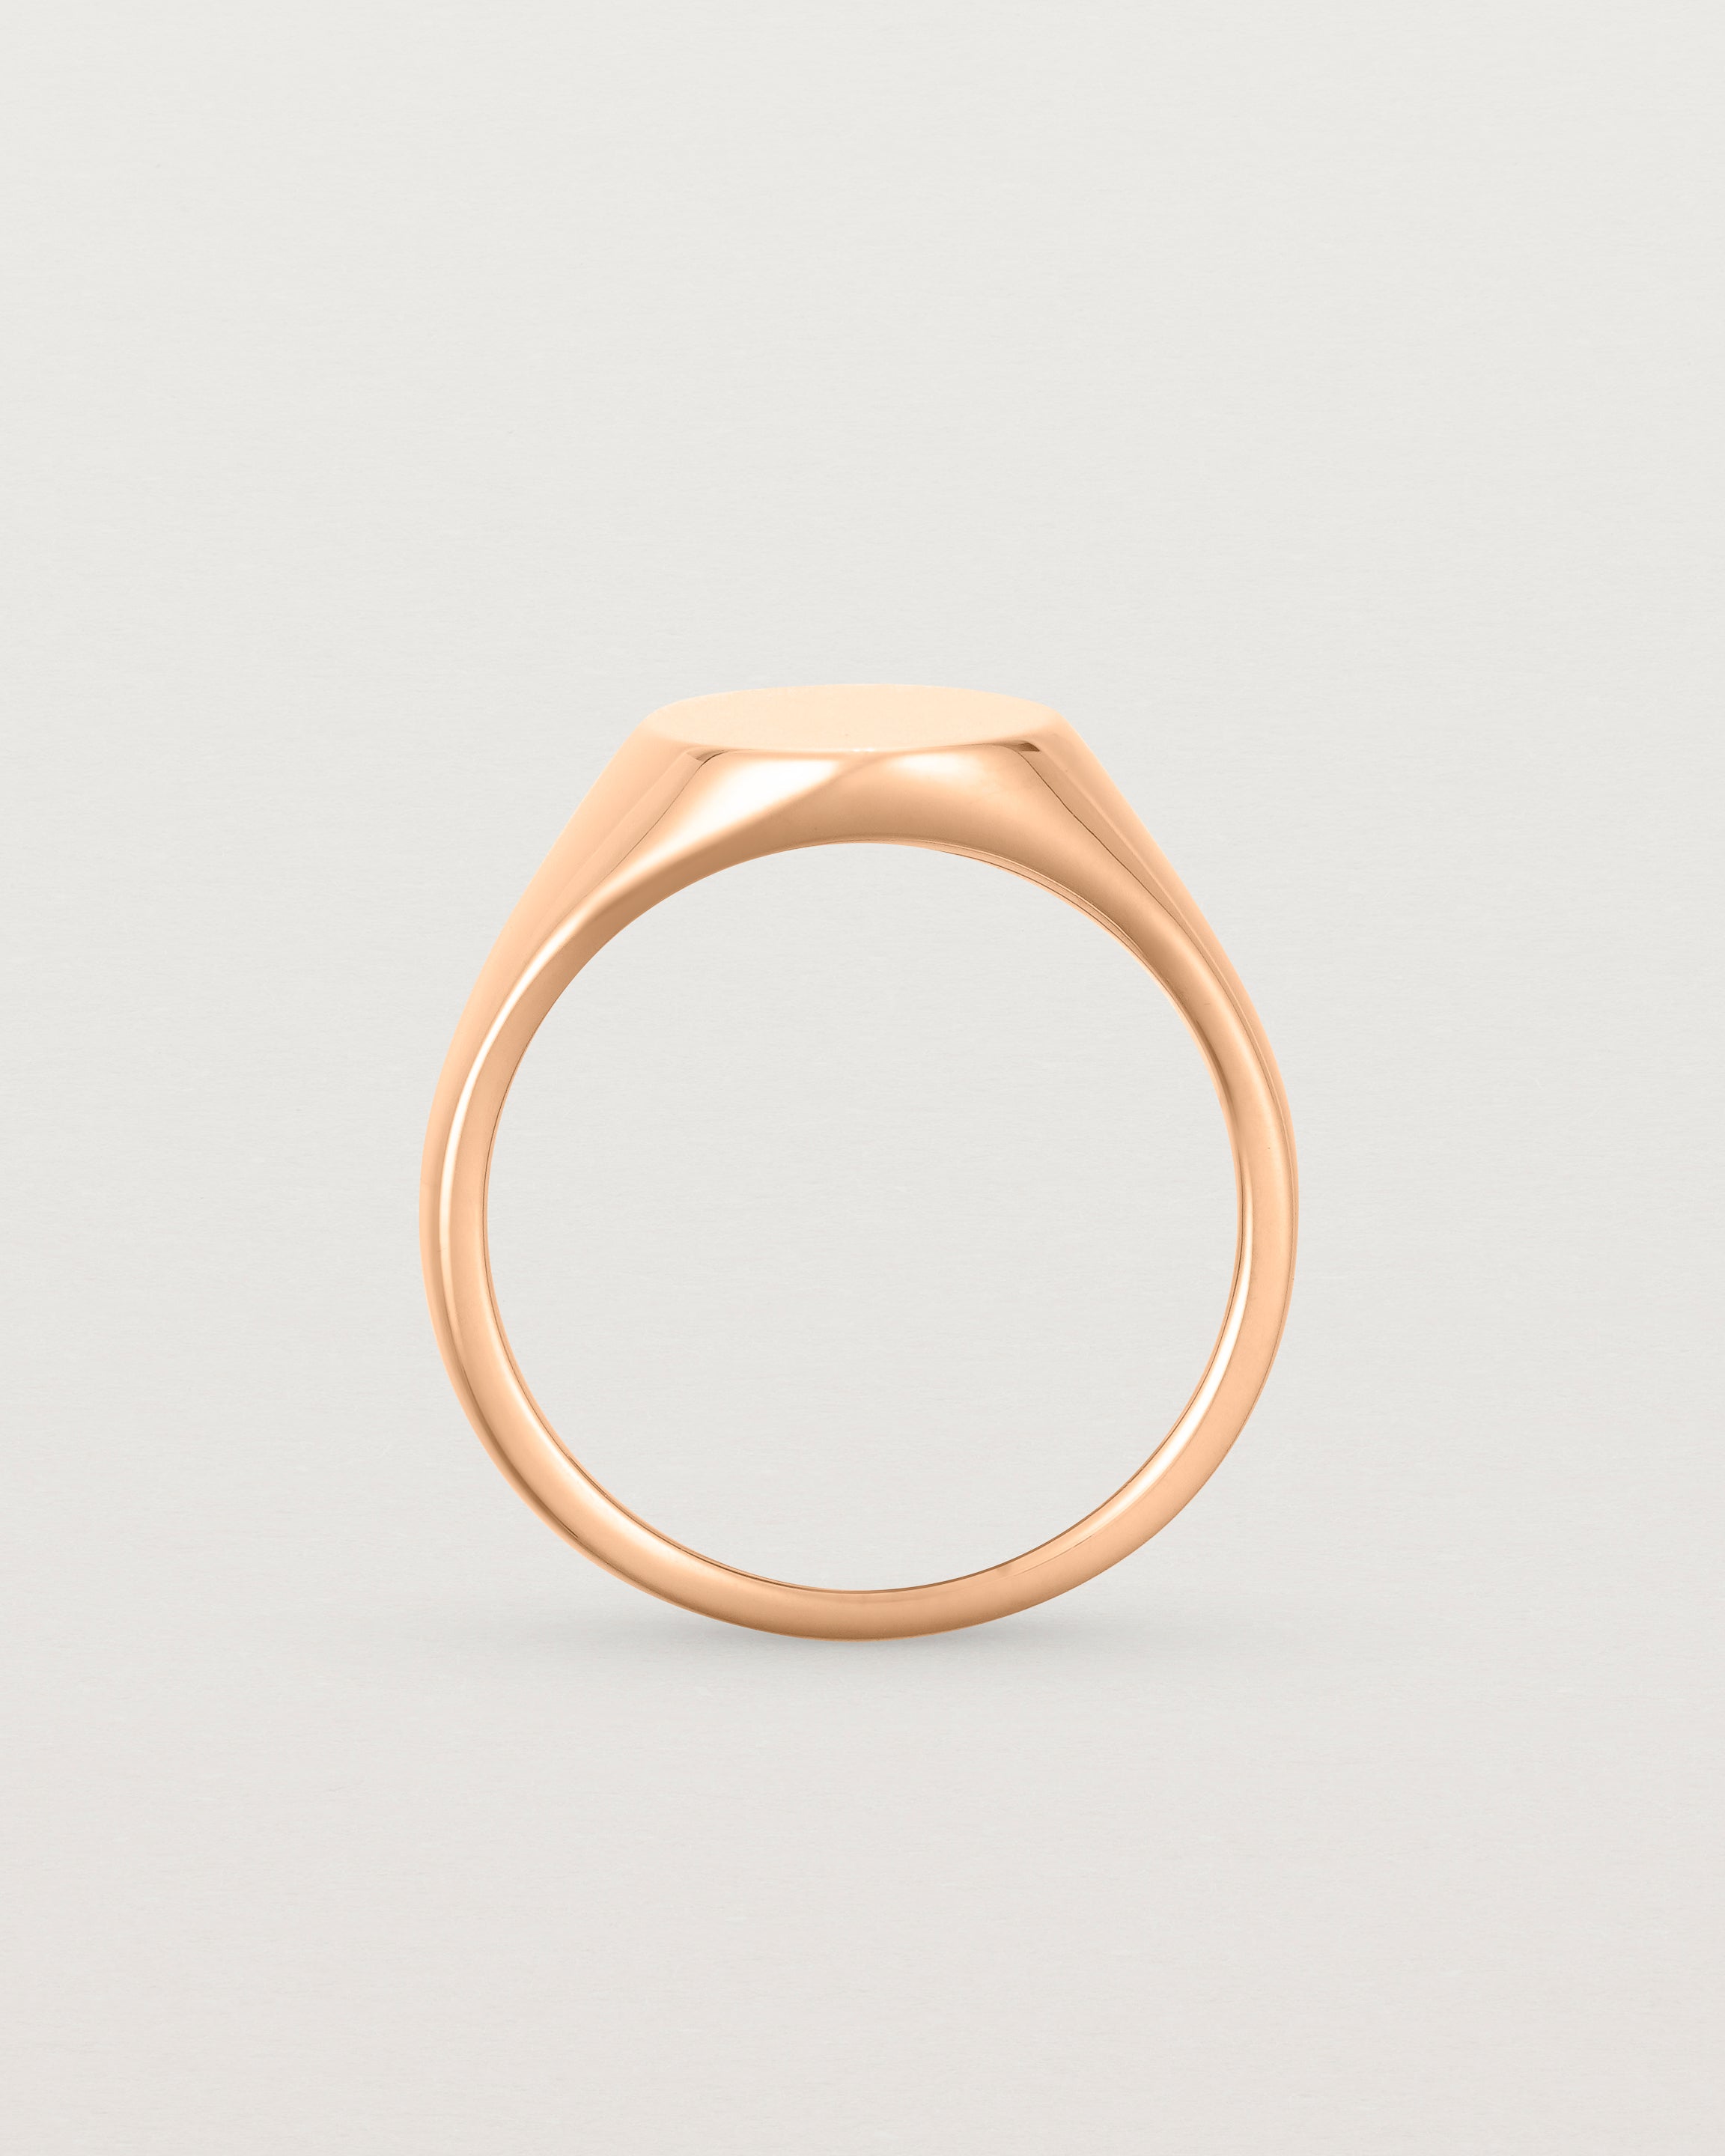 Standing view of the Arden Signet Ring in Rose Gold.